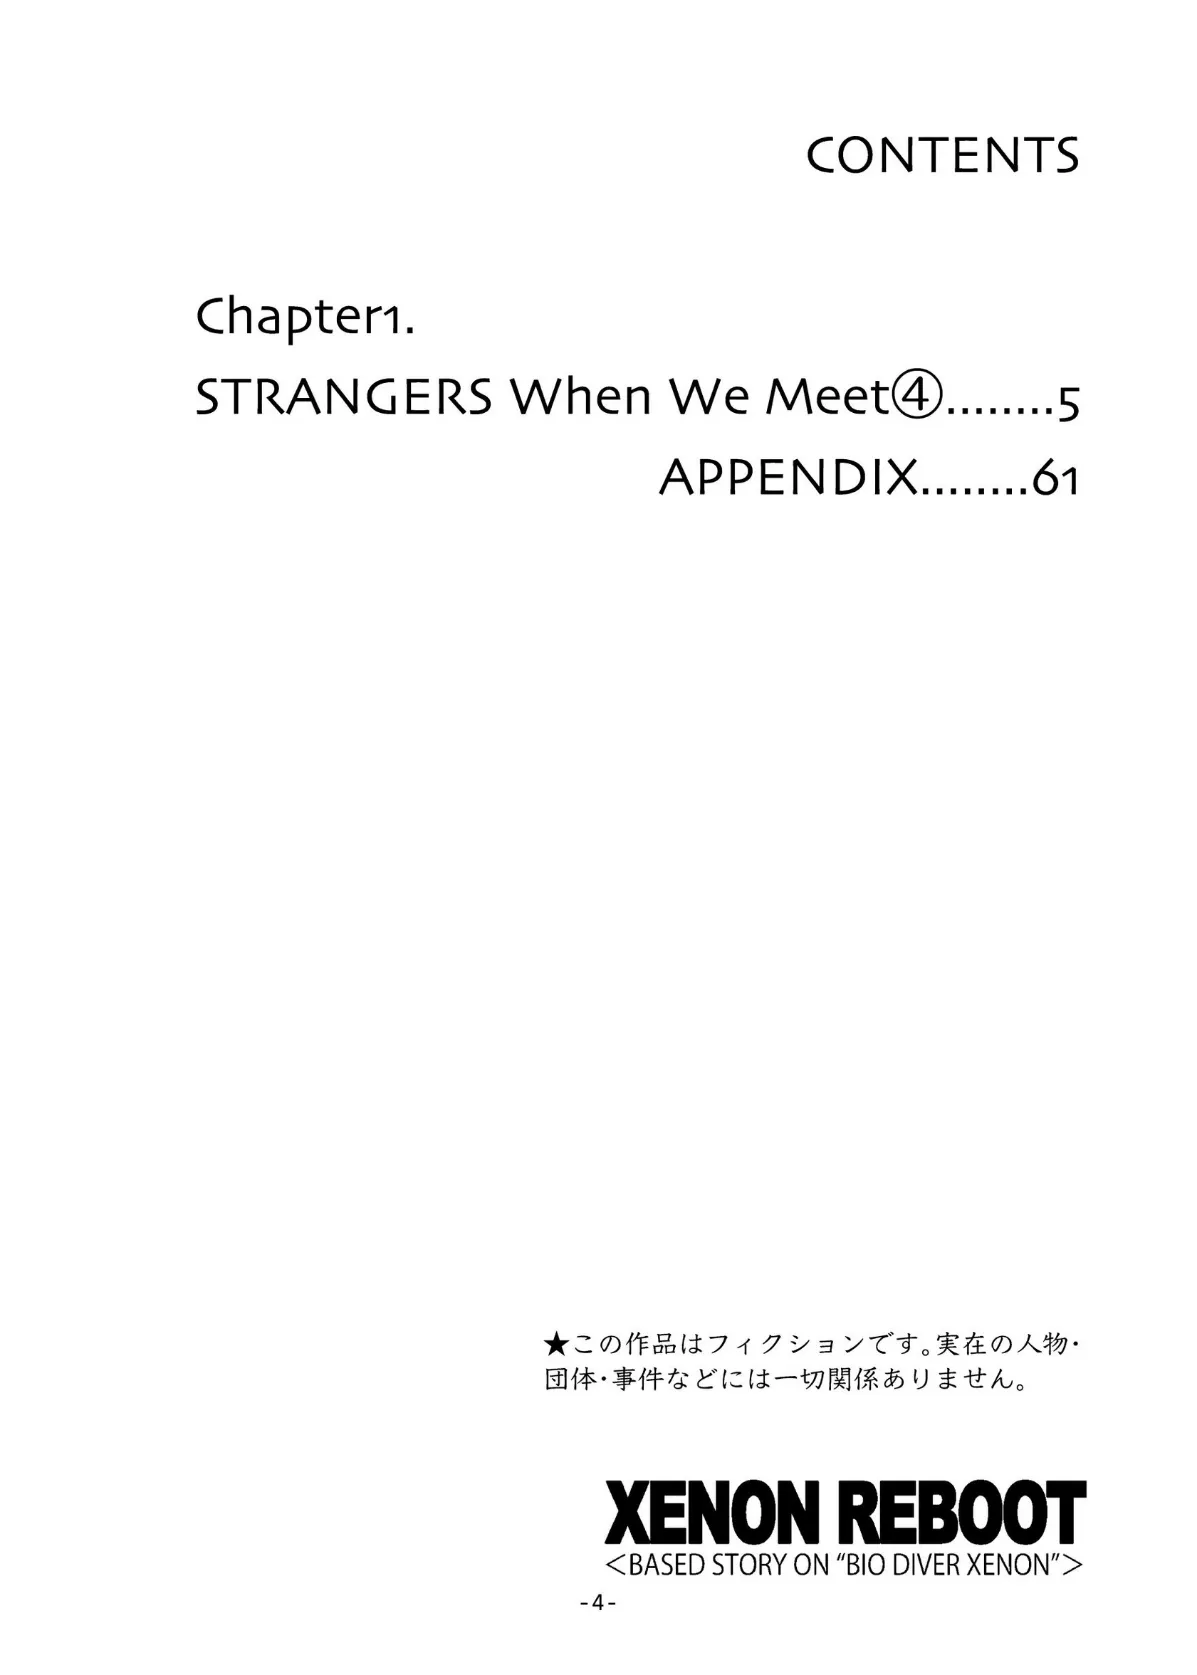 XENON REBOOT＜BASED STORY ON ’BIO DIVER XENON’＞【分冊版】 Chapter1 STRANGERS When We Meet（4） 4ページ